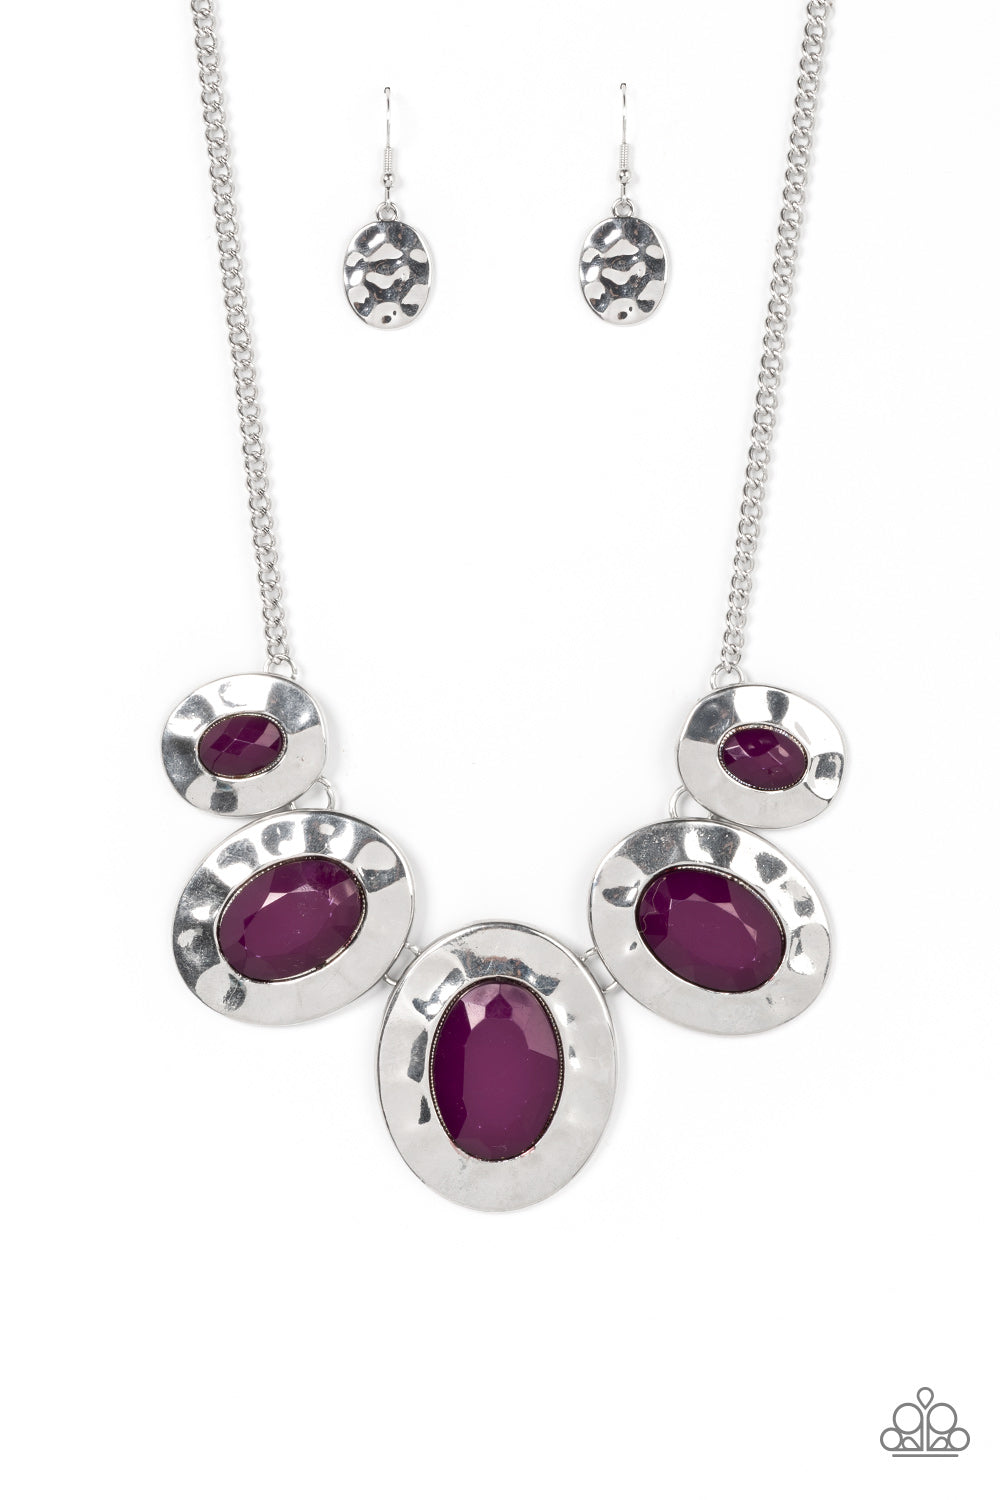 Paparazzi Accessories - Rivera Rendezvous - Purple Necklaces gradually increasing in size, hammered silver oval frames are dotted with faceted plum beads as they delicately link below the collar for a vivacious pop of color. Features an adjustable clasp closure.  Sold as one individual necklace. Includes one pair of matching earrings.